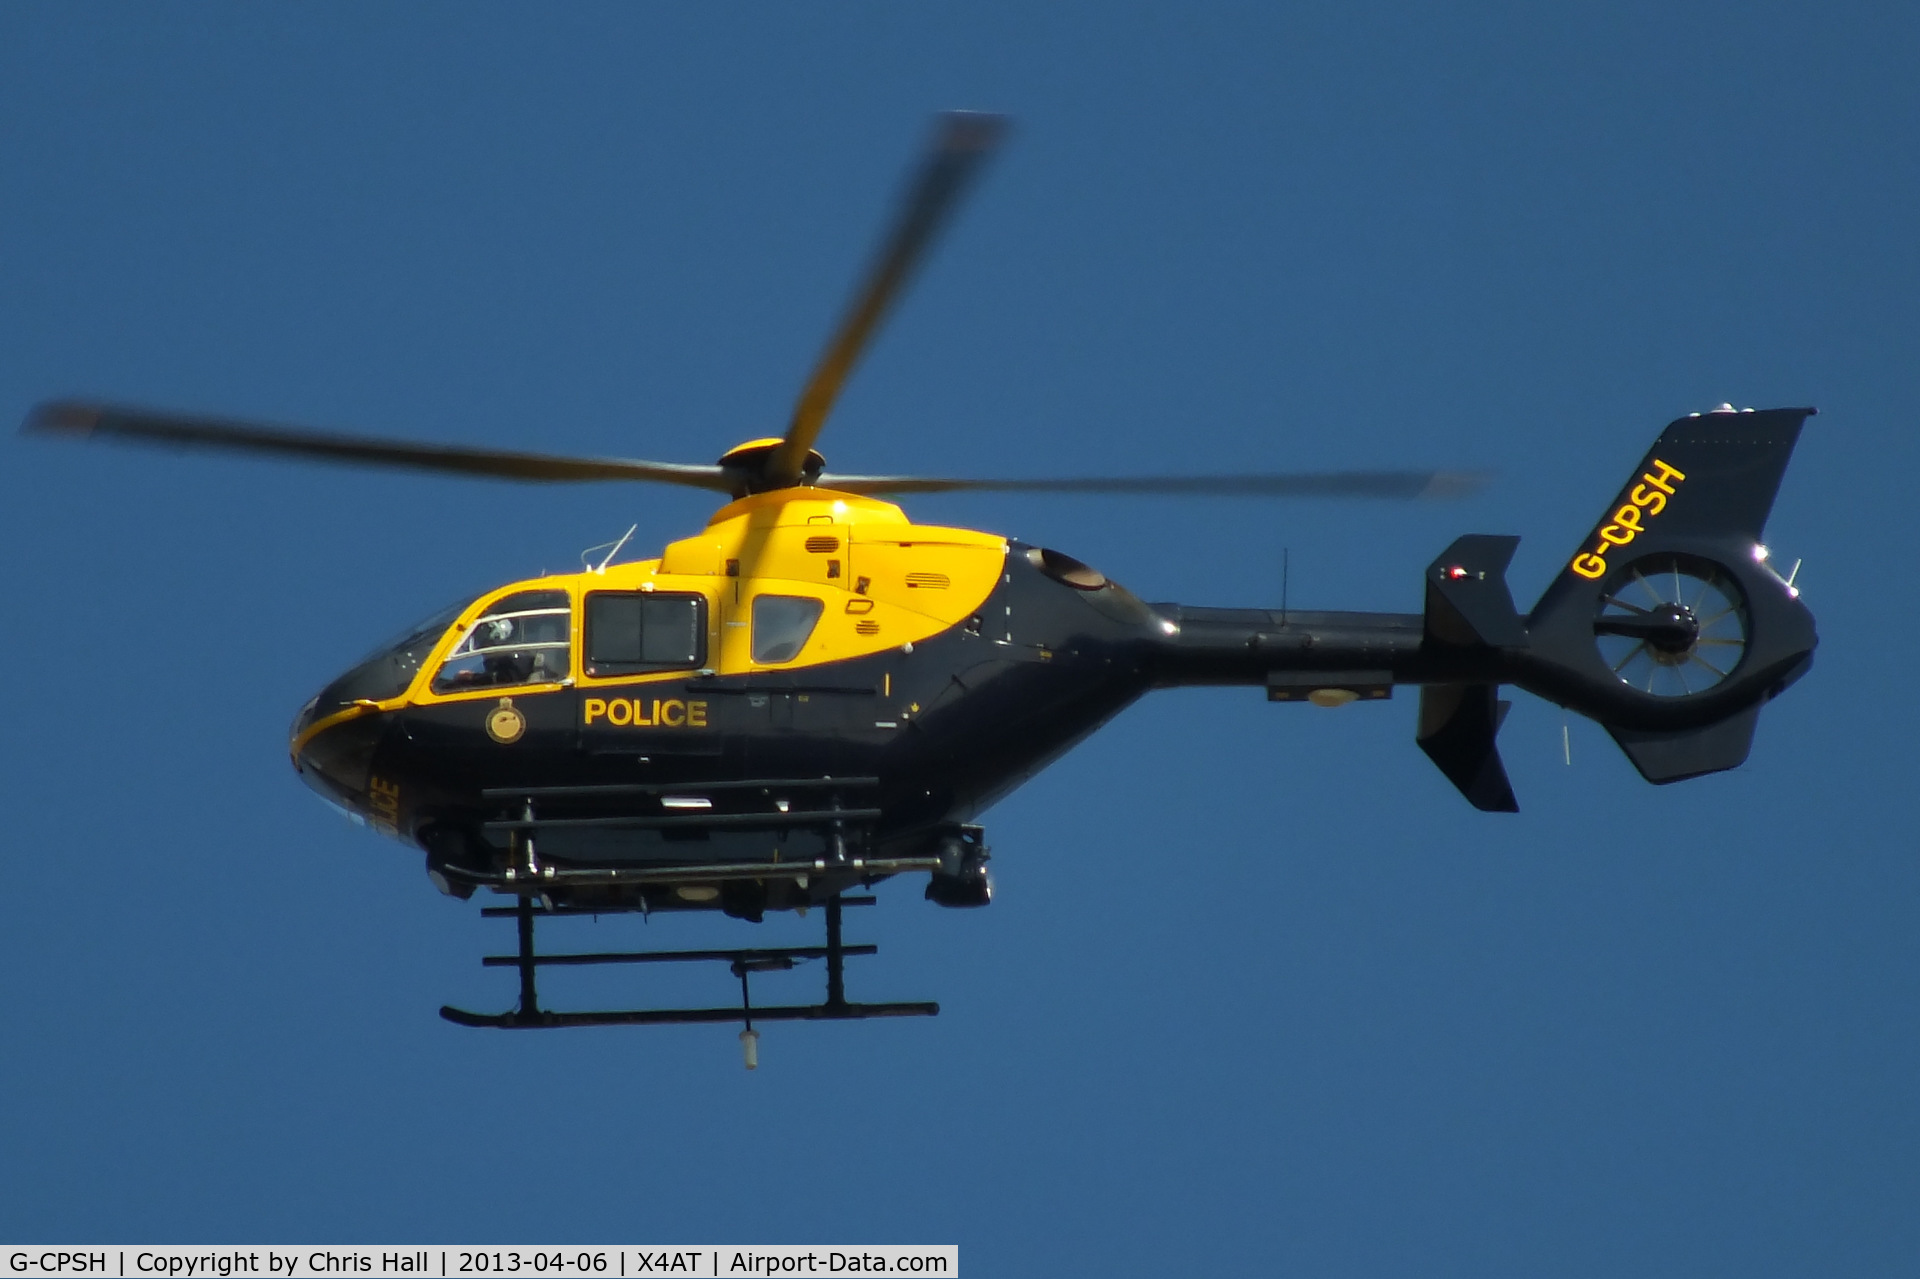 G-CPSH, 2001 Eurocopter EC-135T-2+ C/N 0209, Police helicopter at the 2013 Grand National, Aintree